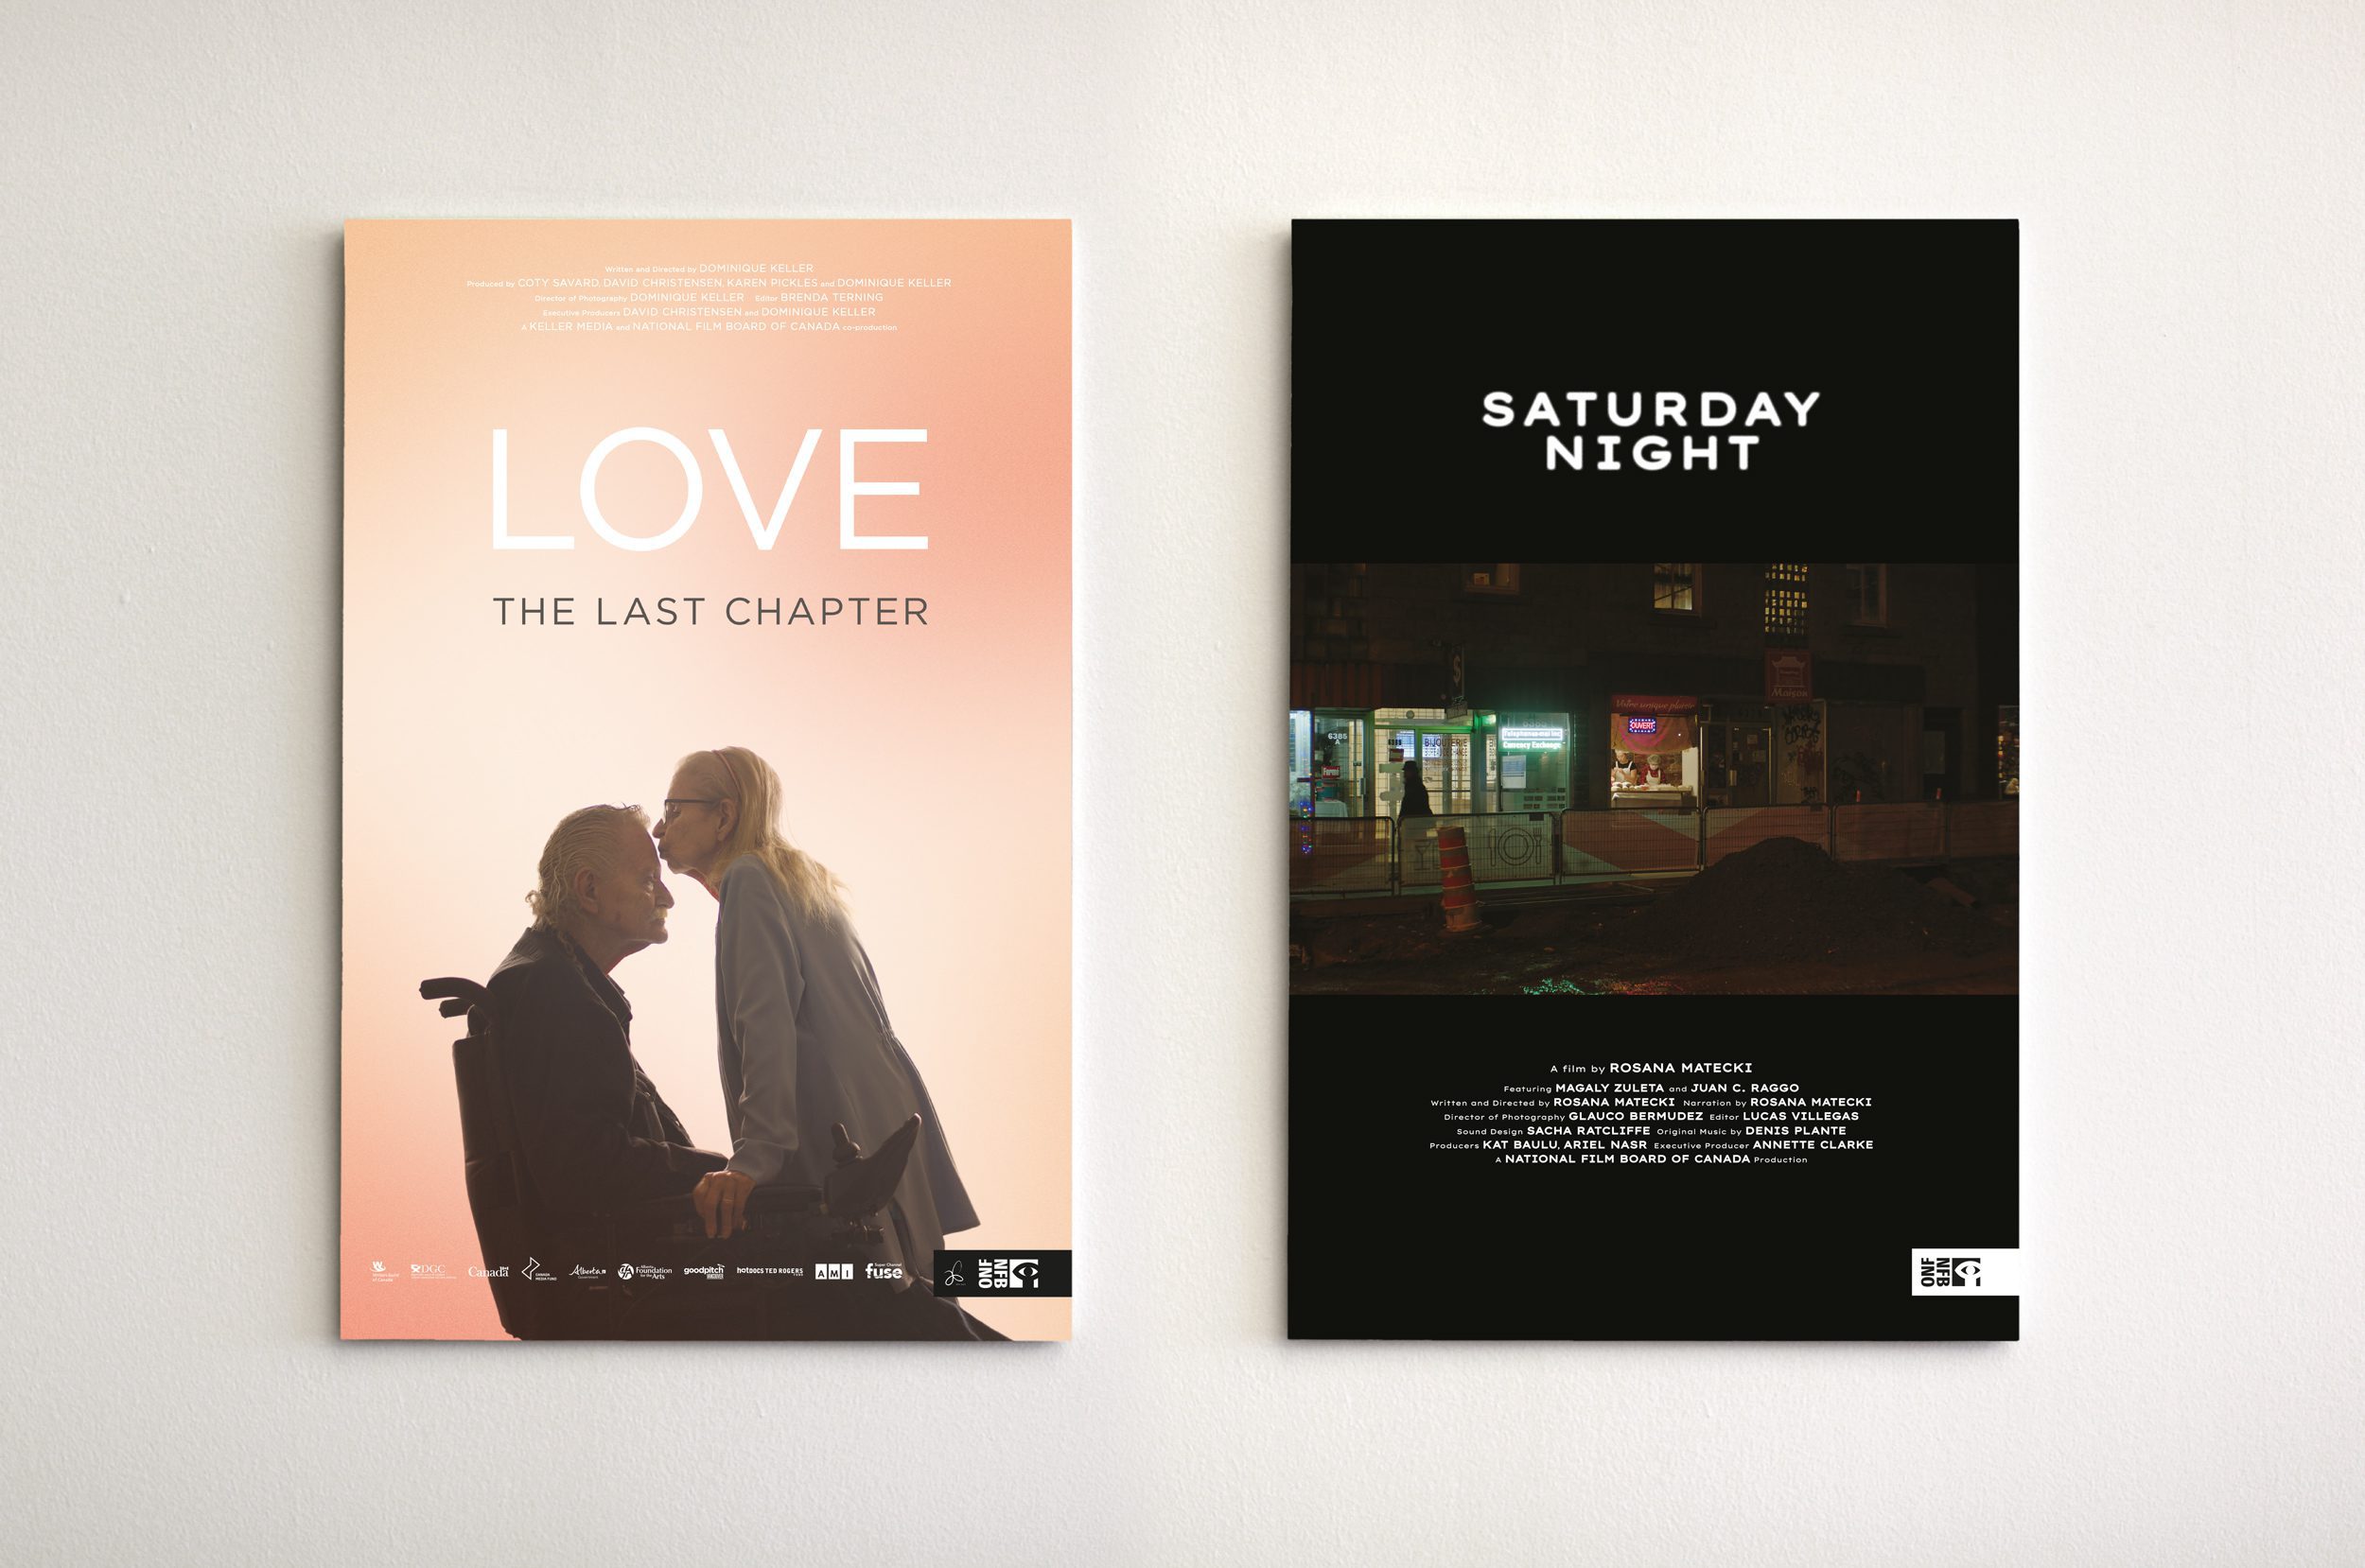 A poster for Love, the Last Chapter and Saturday Night on a white wall